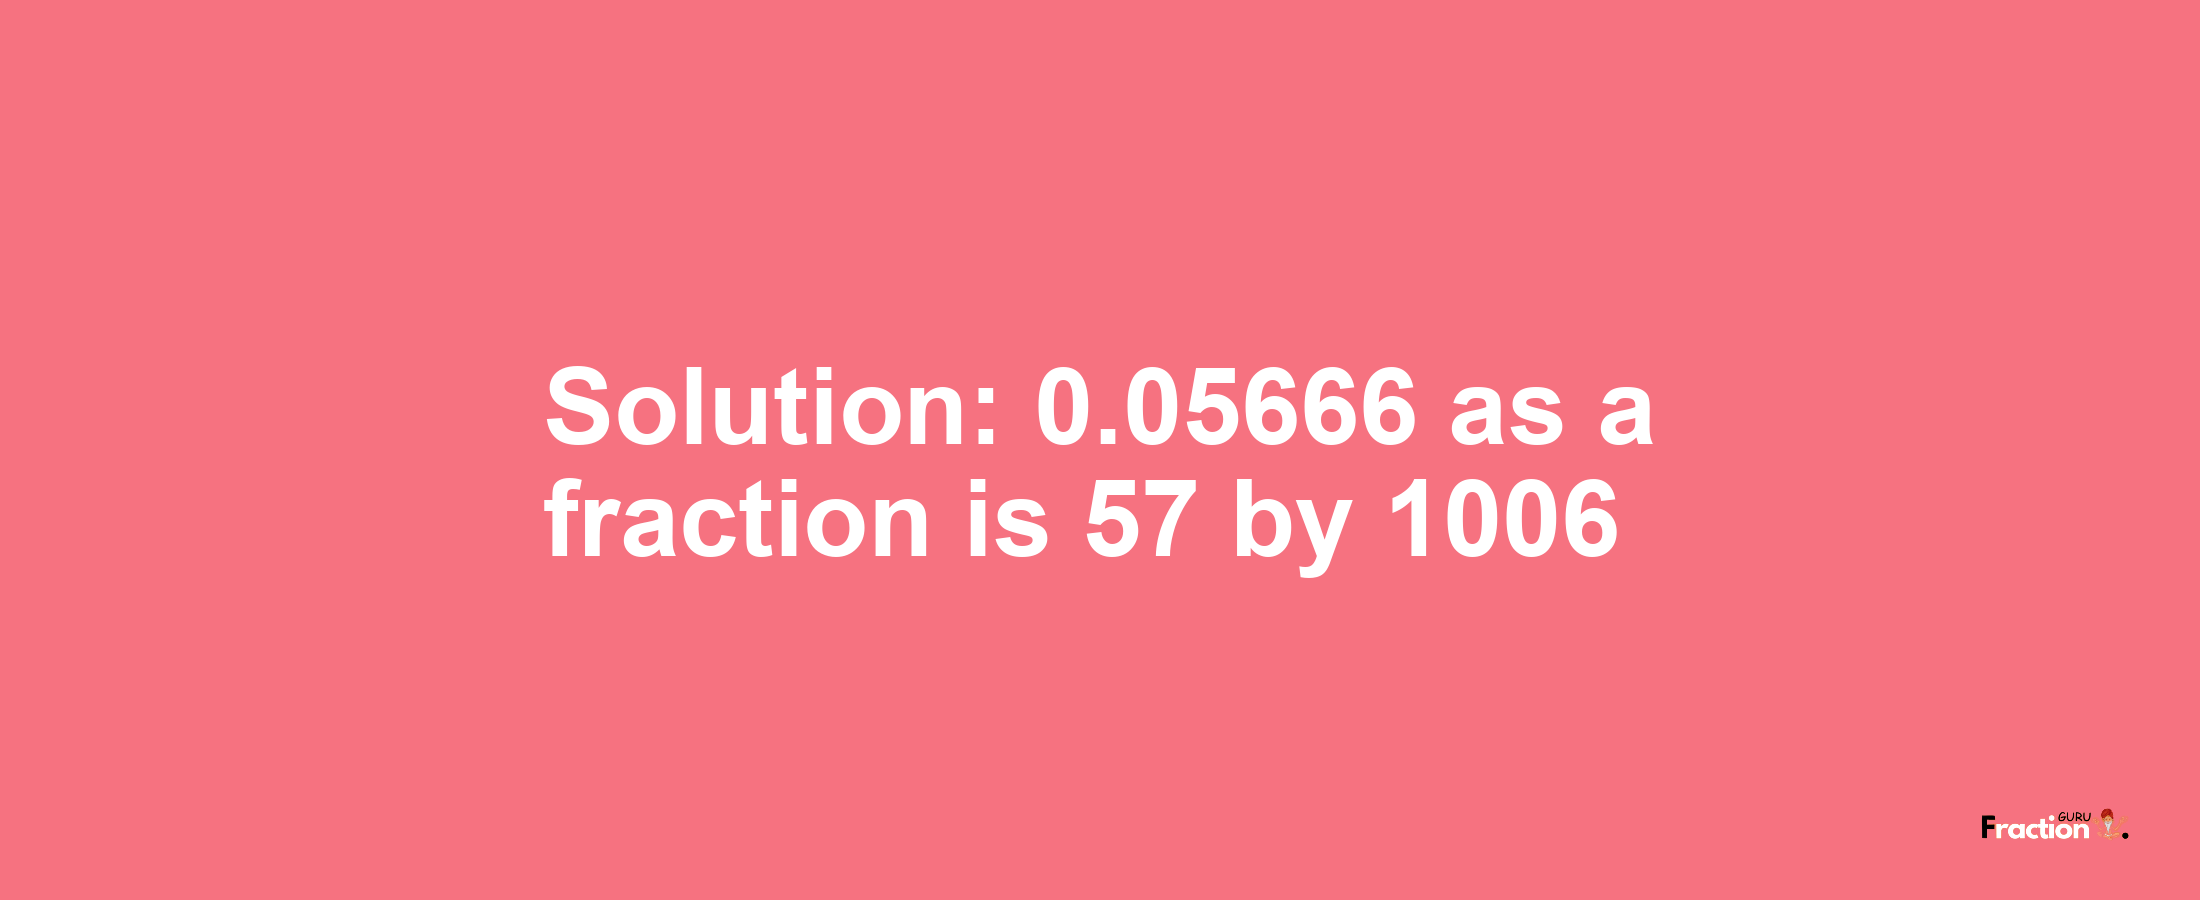 Solution:0.05666 as a fraction is 57/1006